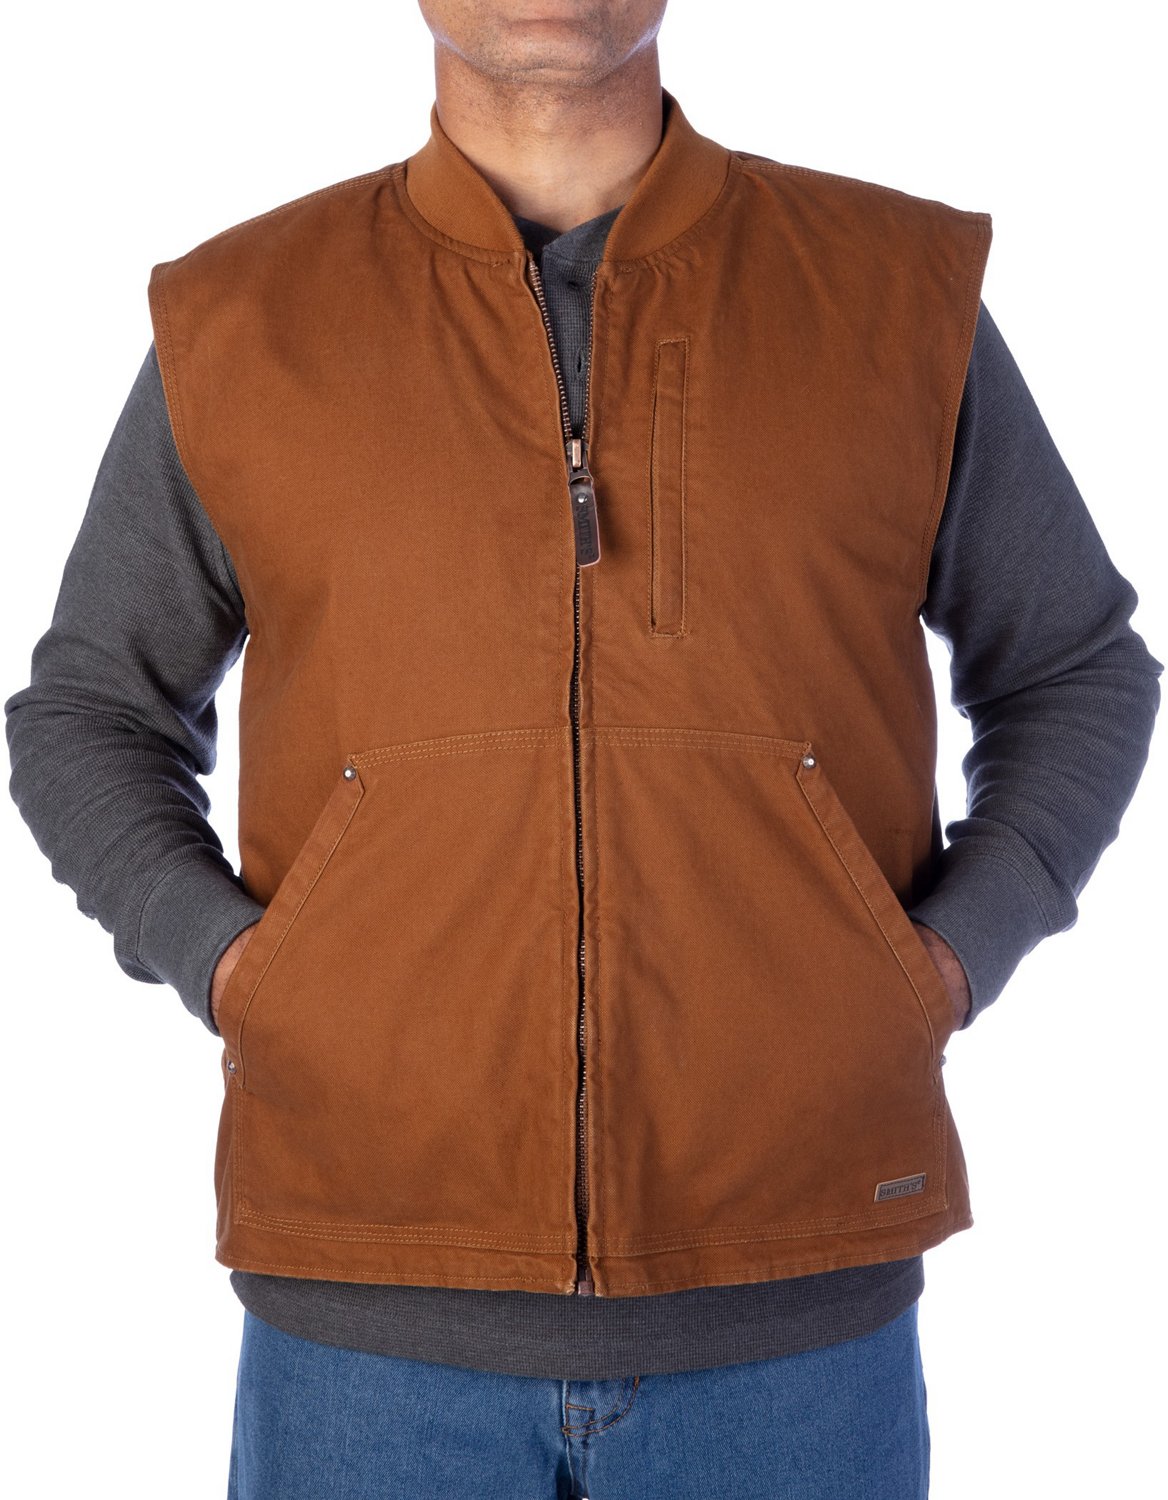 Smith's Men's Sherpa Lined Duck Canvas Work Vest | Academy